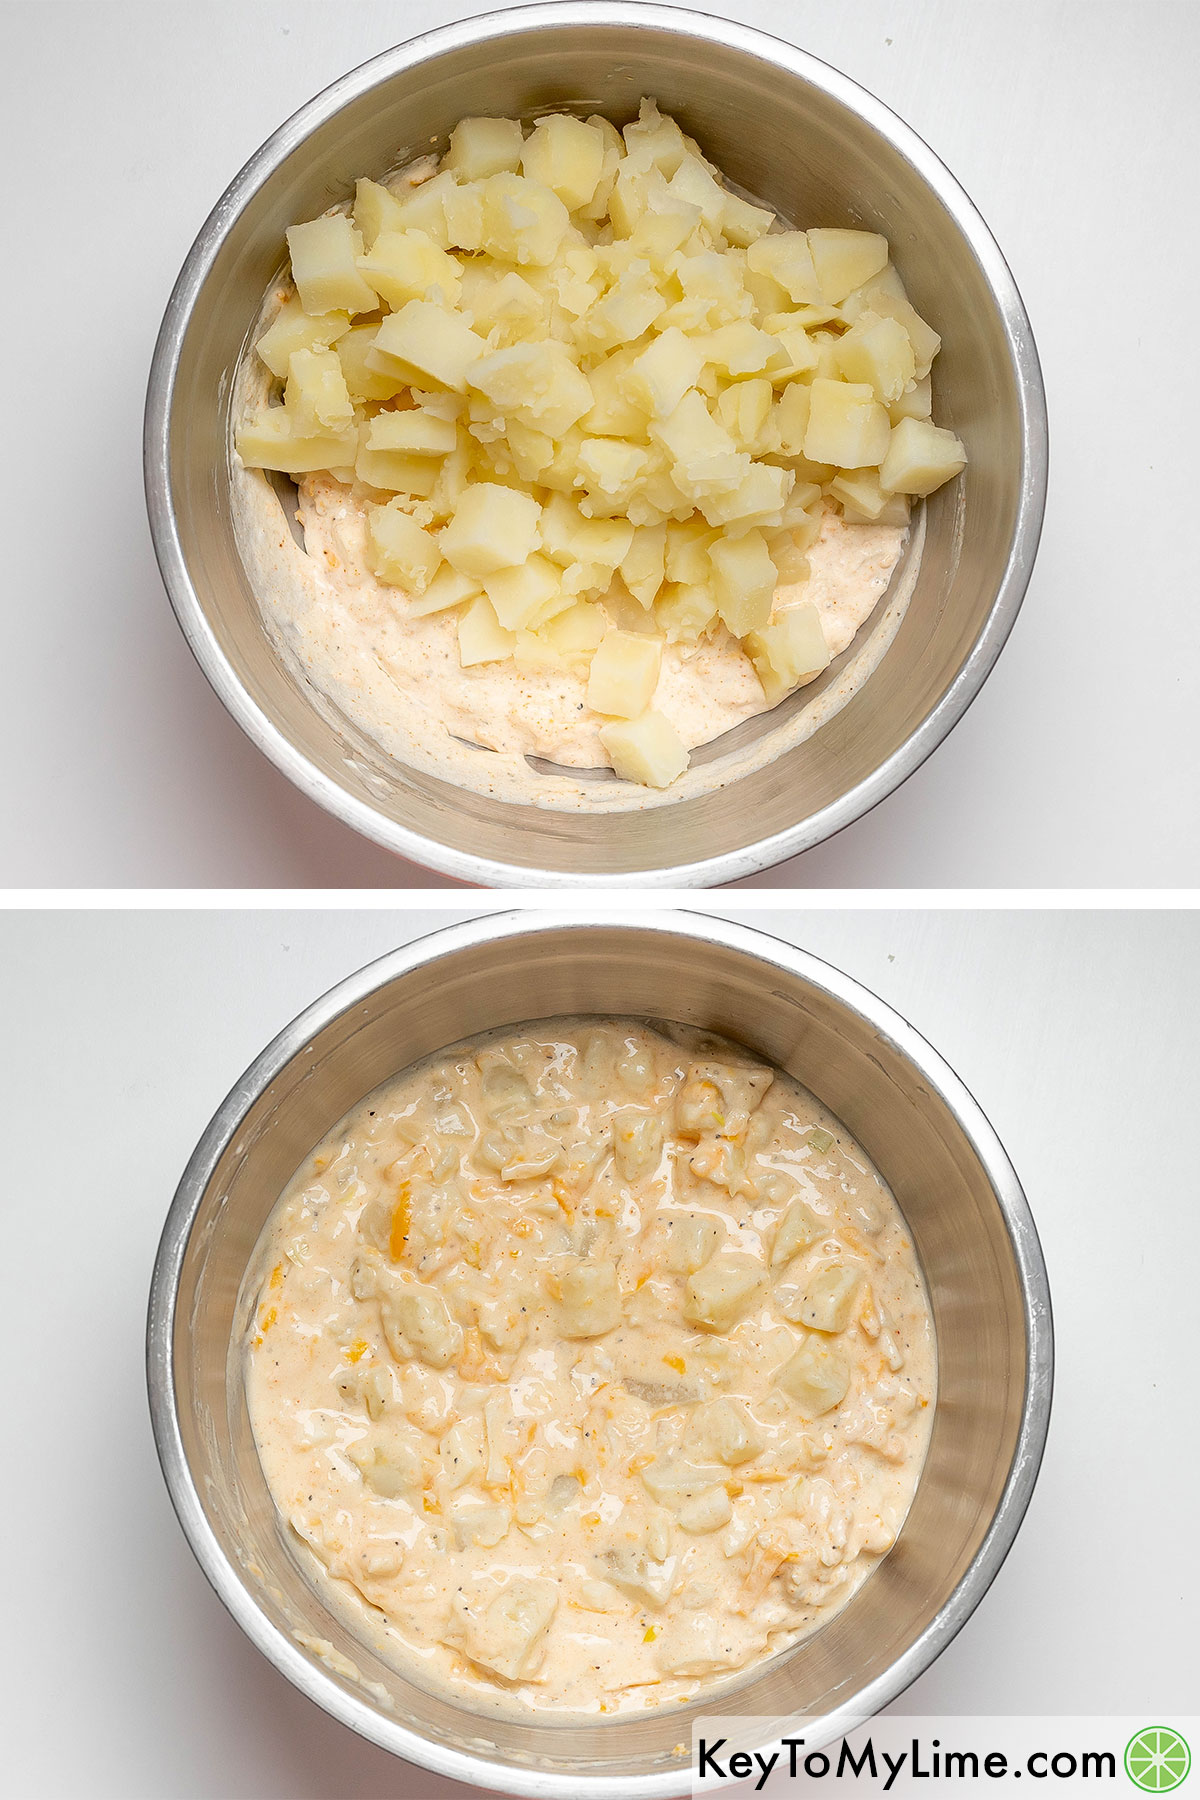 Adding and folding in the cut potatoes to the wet cheese mixture until combined.